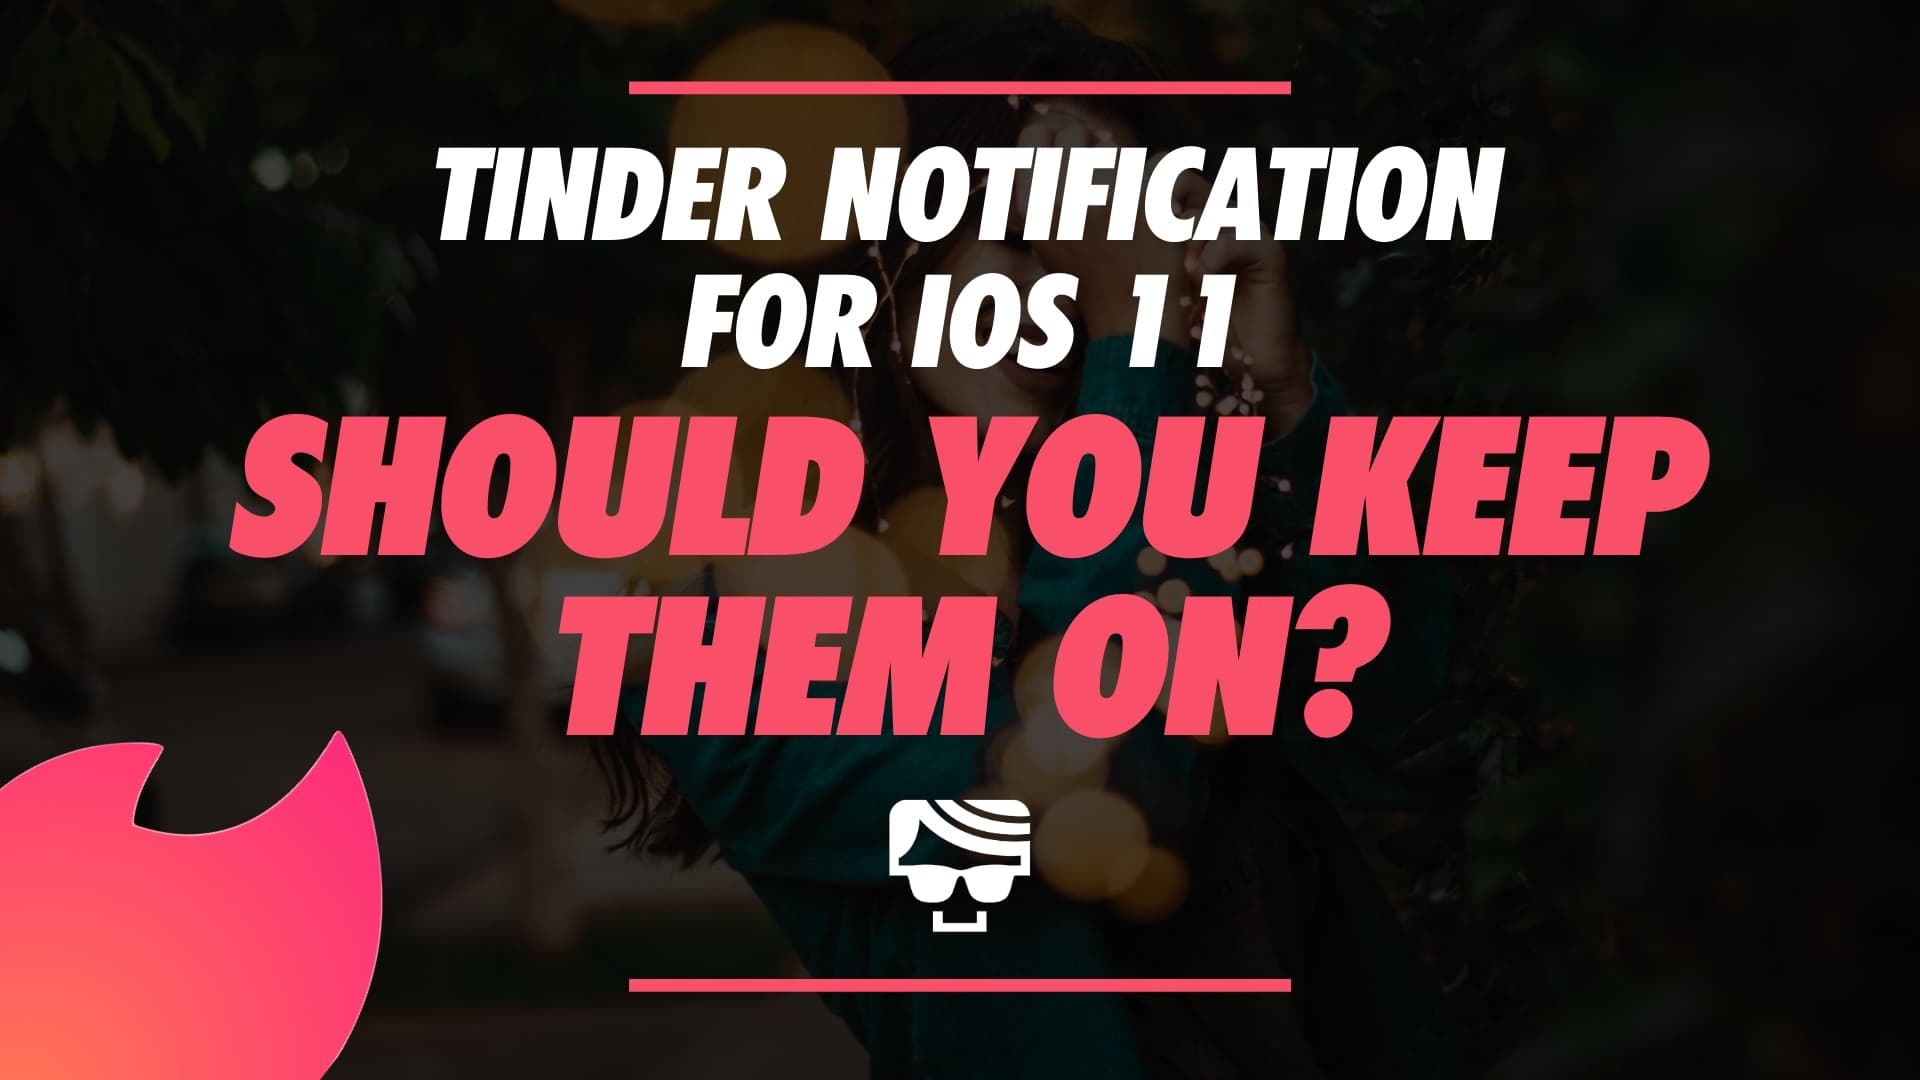 How To Turn On Tinder Notifications For iOS 11| Should They Be On?